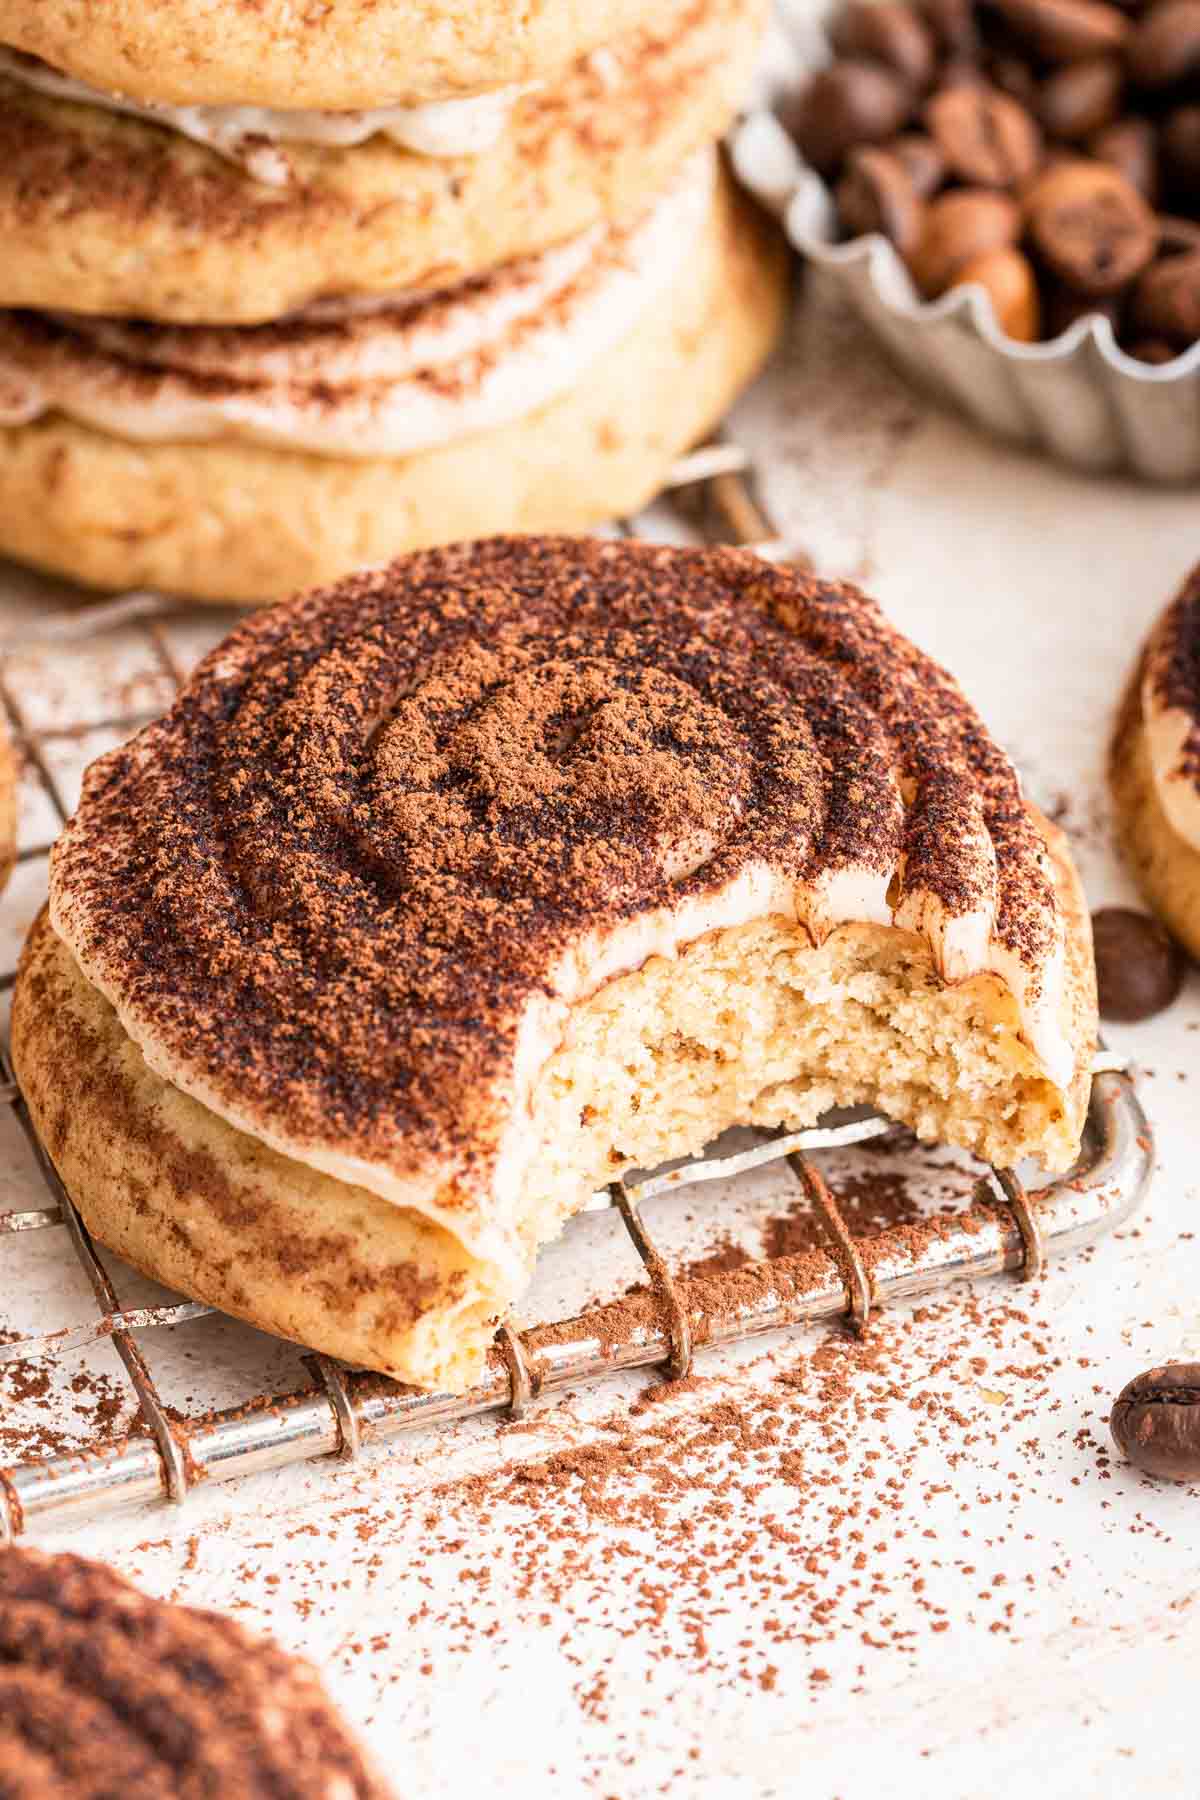 Tiramisu cookies with white frosting and cocoa powder dusted on top.